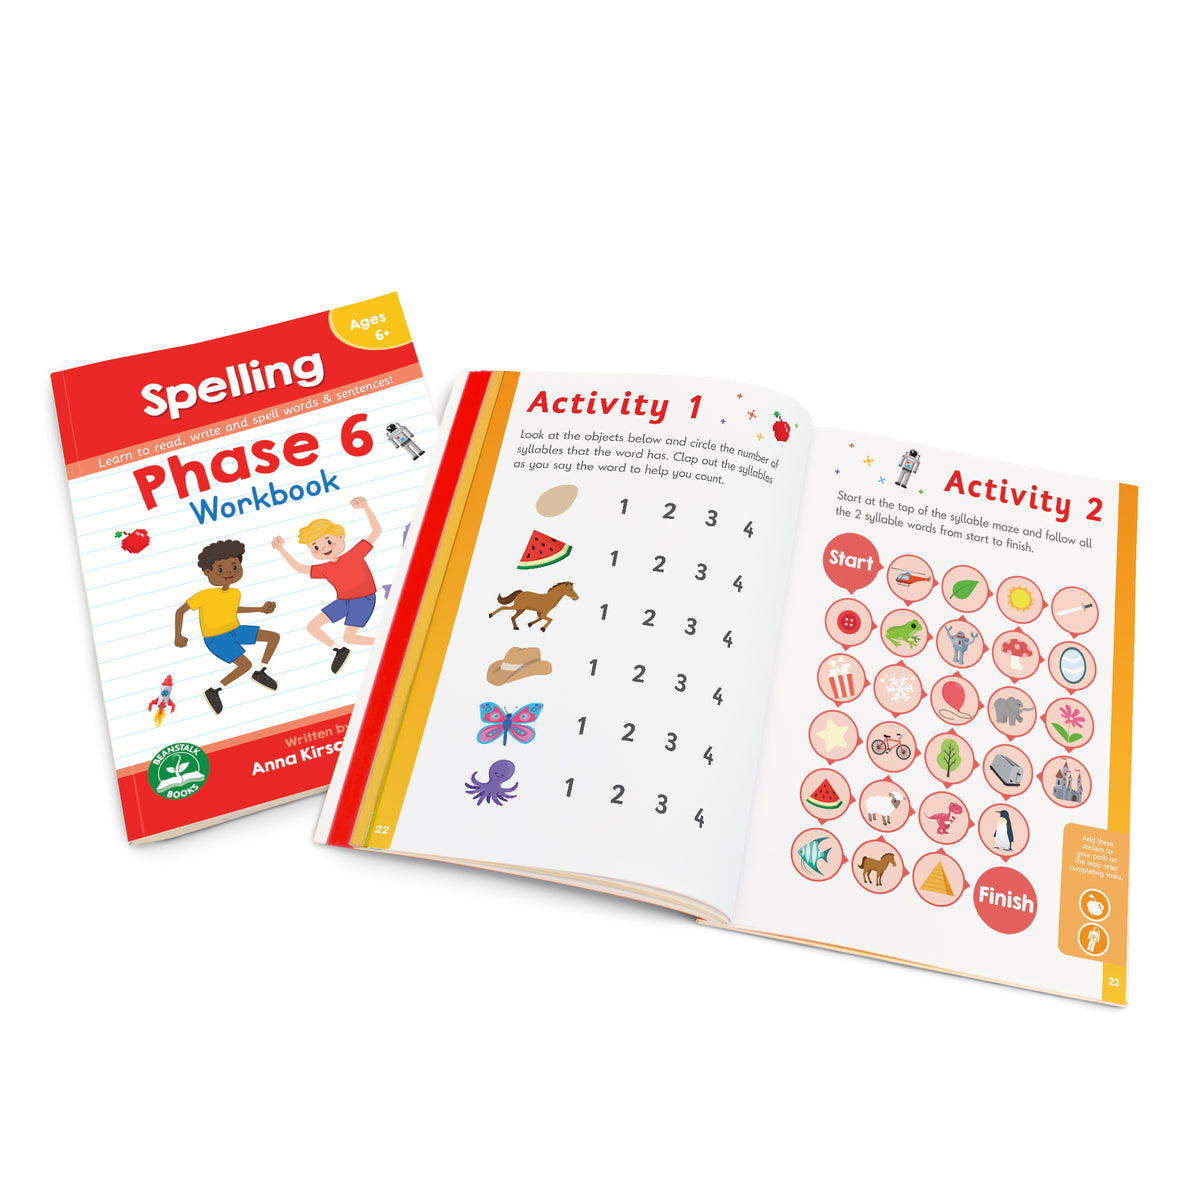 Junior Learning BB920 Phase 6 Spelling Workbook - 12 Pack cover and spread